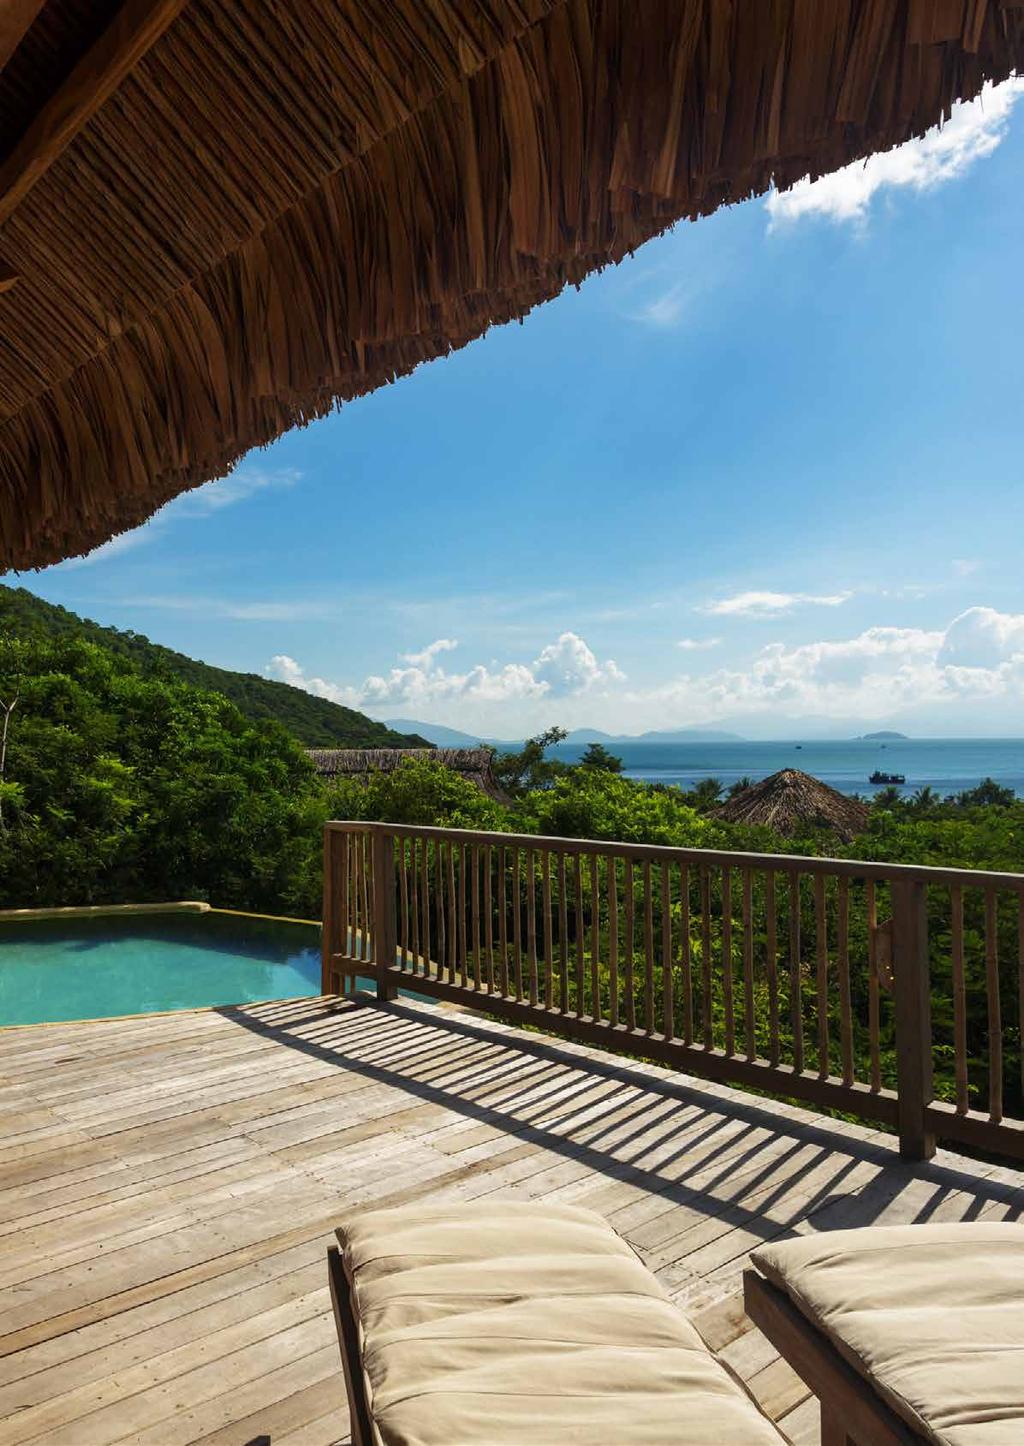 TWO BEDROOM HILL TOP POOL VILLA Located on the hill top with beautiful ocean views and a private pool.